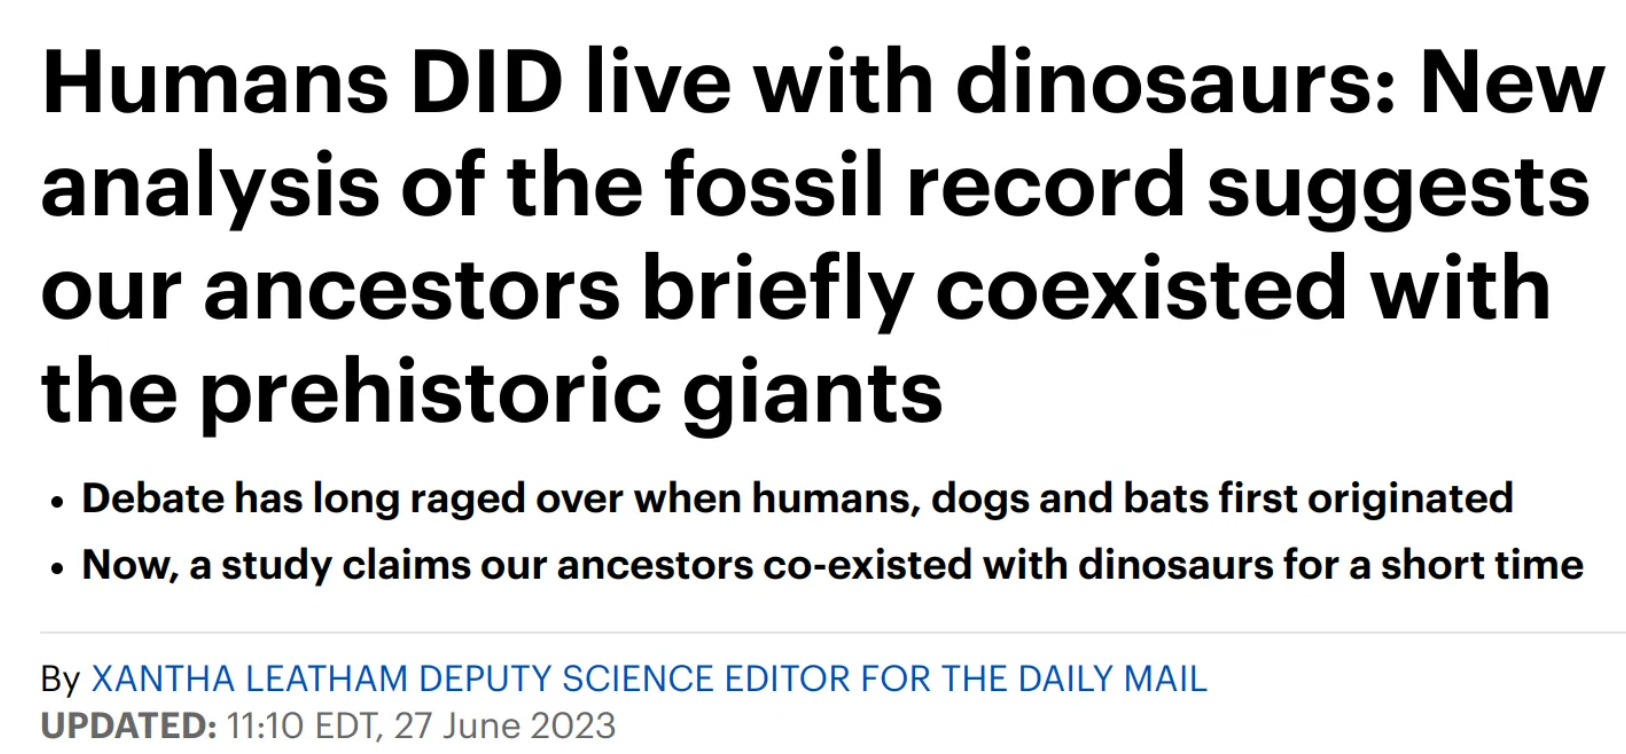 No Uk Daily Mail, Humans and Dinosaurs DID NOT Live At The Same Time.